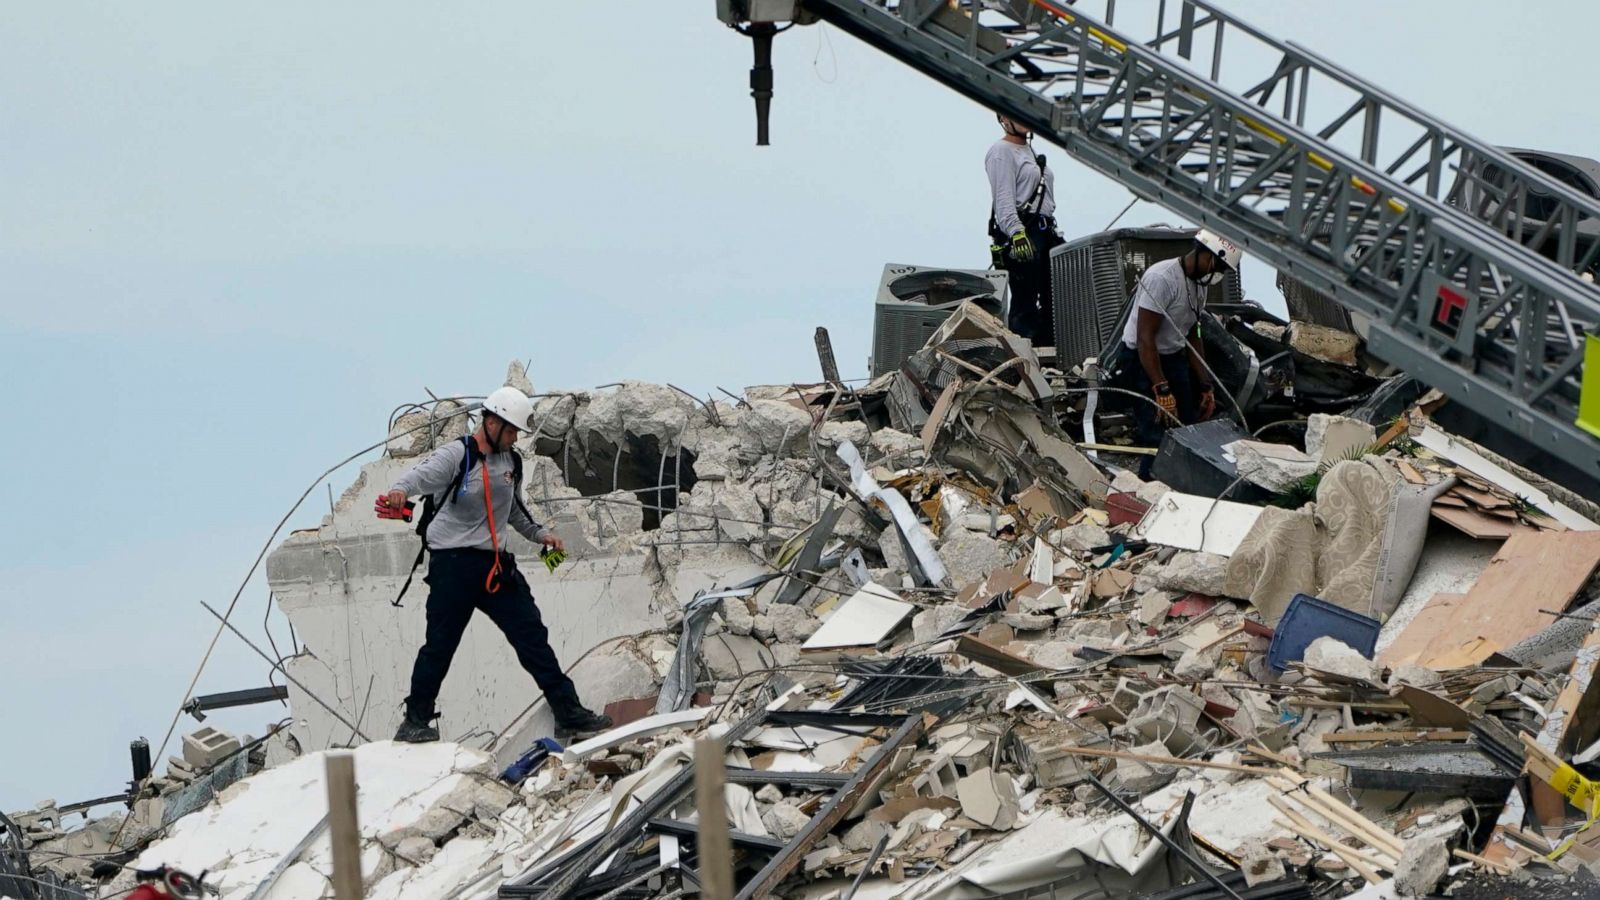 Death toll rises to 11 at Florida building collapse site, over 150 missing